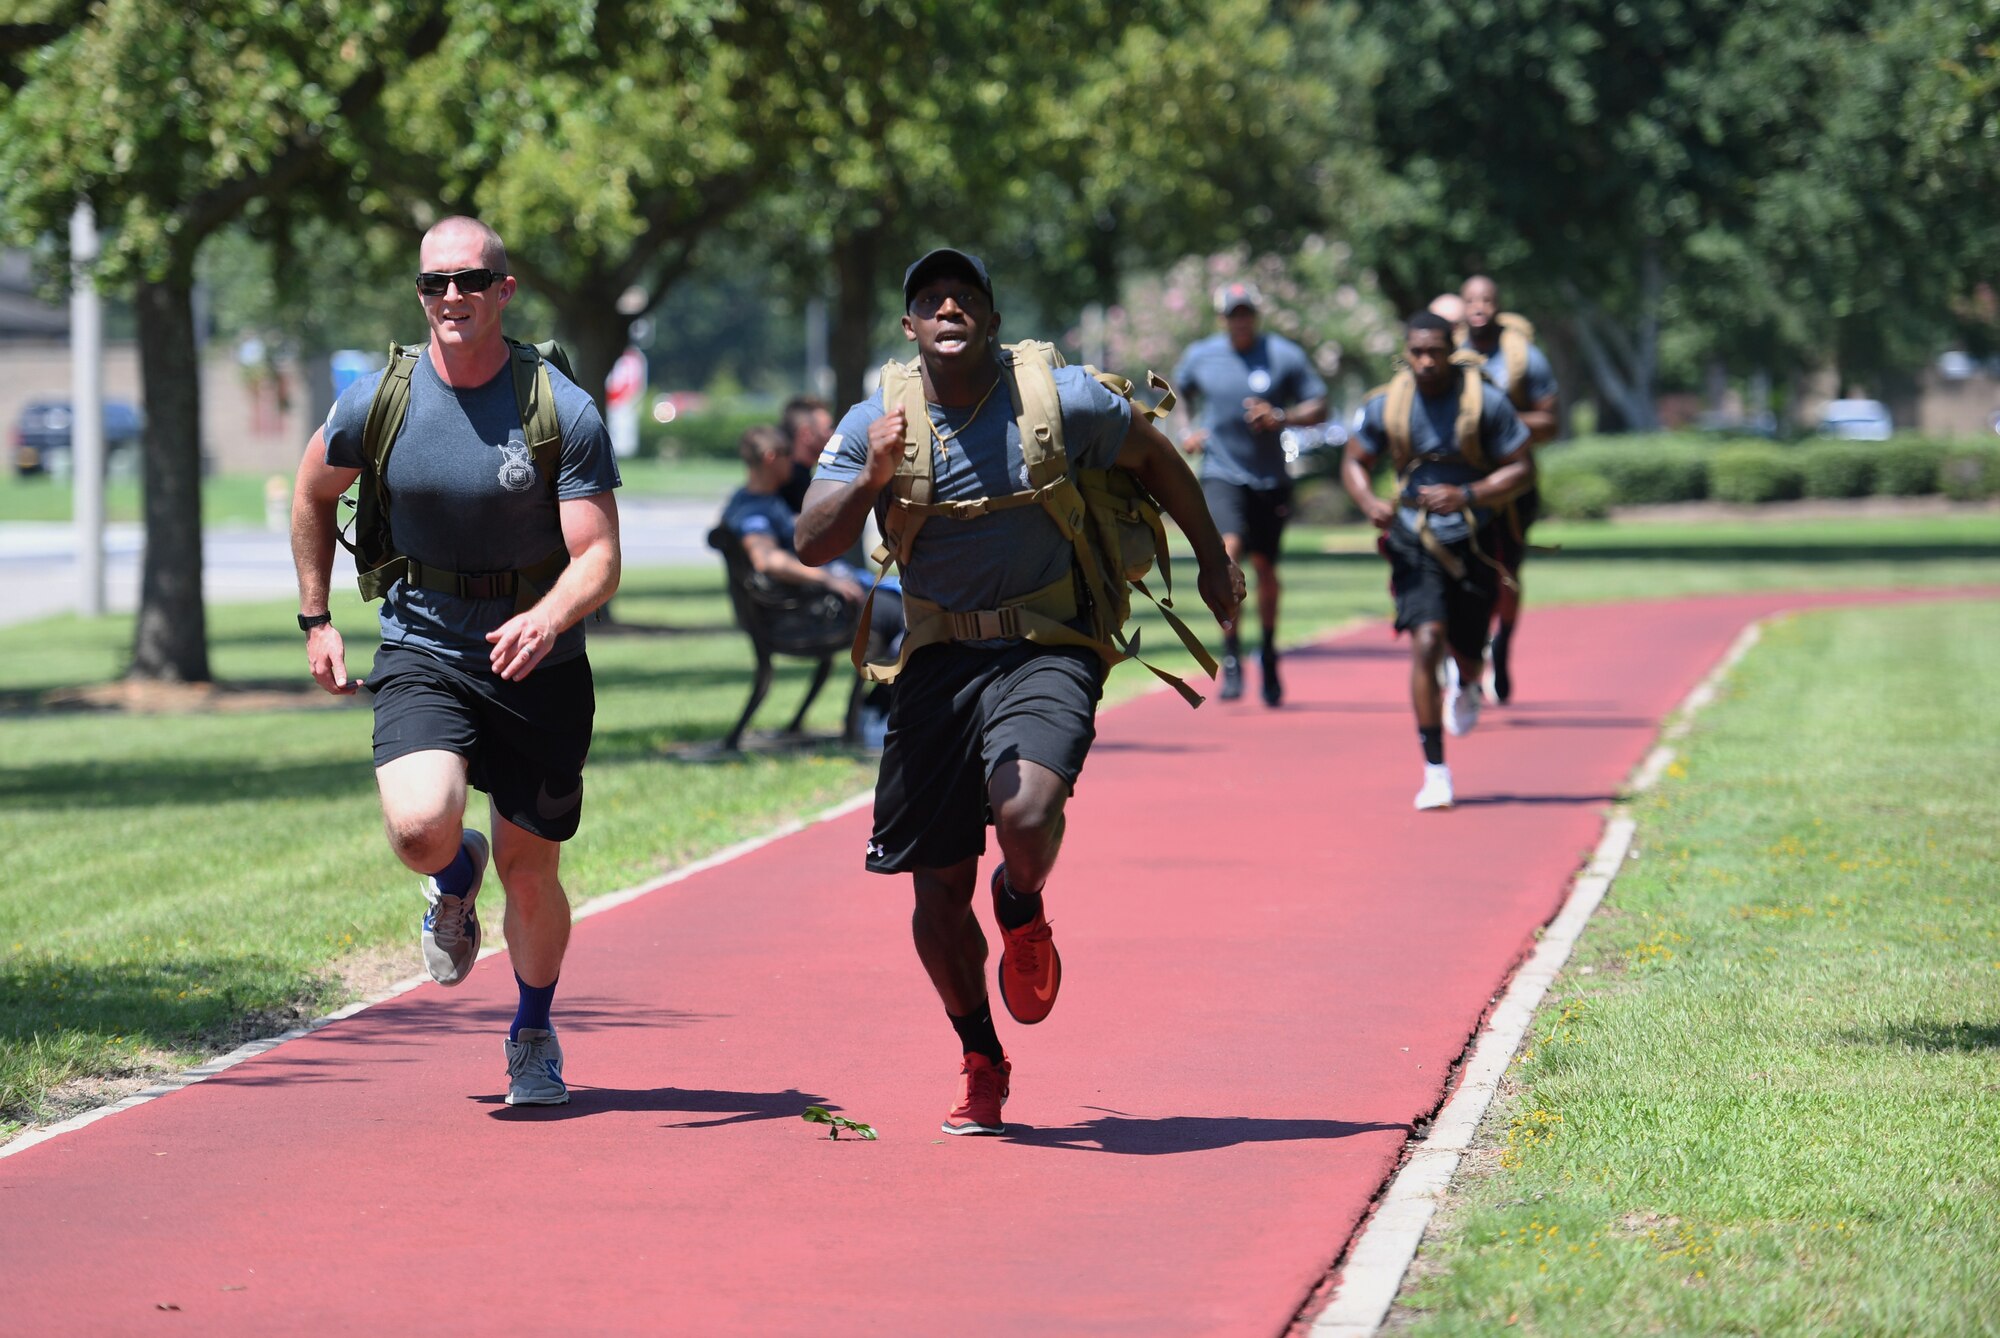 U.S. Air Force Staff Sgt. Jesse Daniel, 81st Security Forces Squadron confinement NCO in charge, and Staff Sgt. Tradarius Christian, 81st SFS police services, lead their team in running a lap while carrying ruck sacks during the 81st SFS Defender's Challenge Ruck on the Crotwell Track on Keesler Air Force Base, Mississippi, Aug. 16, 2019. The competition, consisting of 11 four-person teams, completing seven obstacles, was one of several events in recognition of The Year of the Defender. (U.S. Air Force photo by Kemberly Groue)